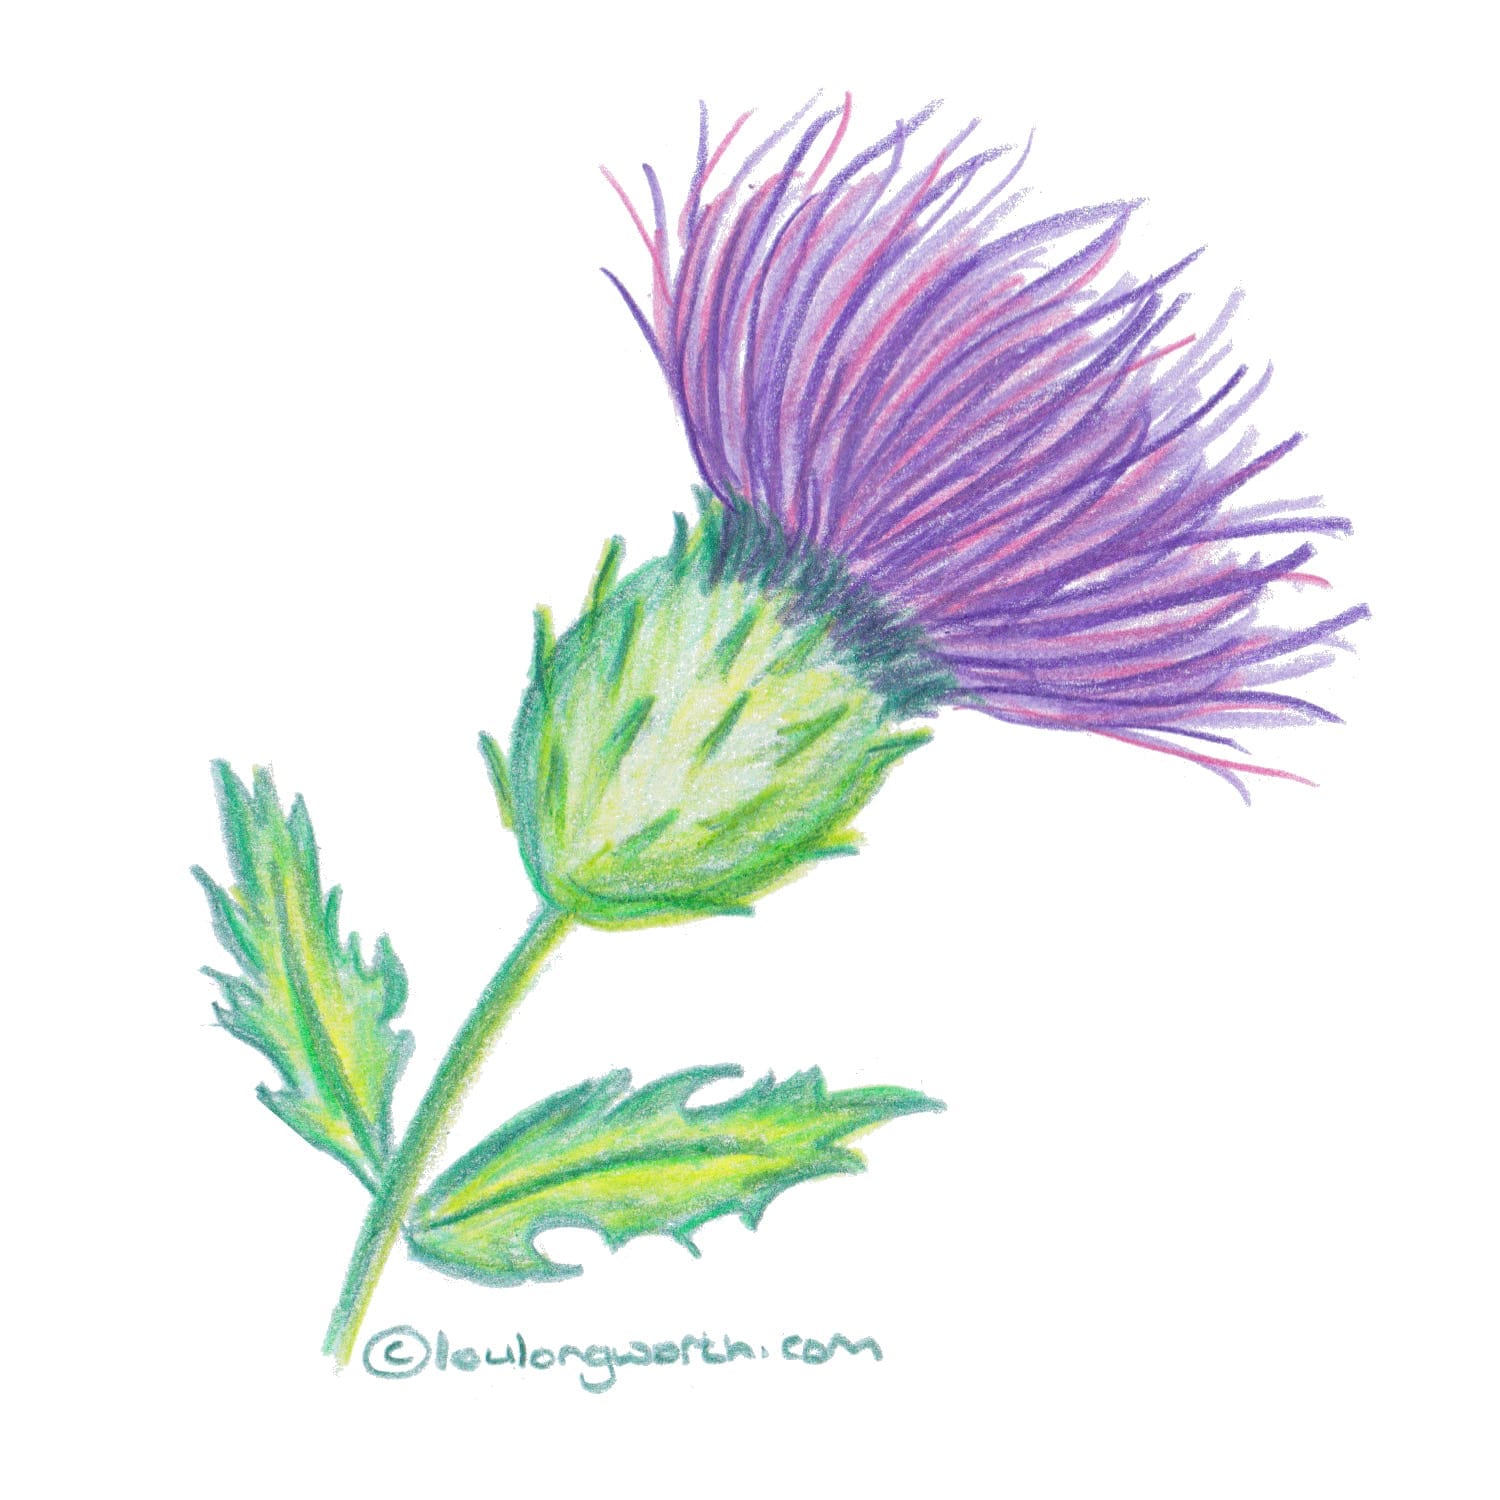 Scottish Themed Drawings thistle drawing in pencil